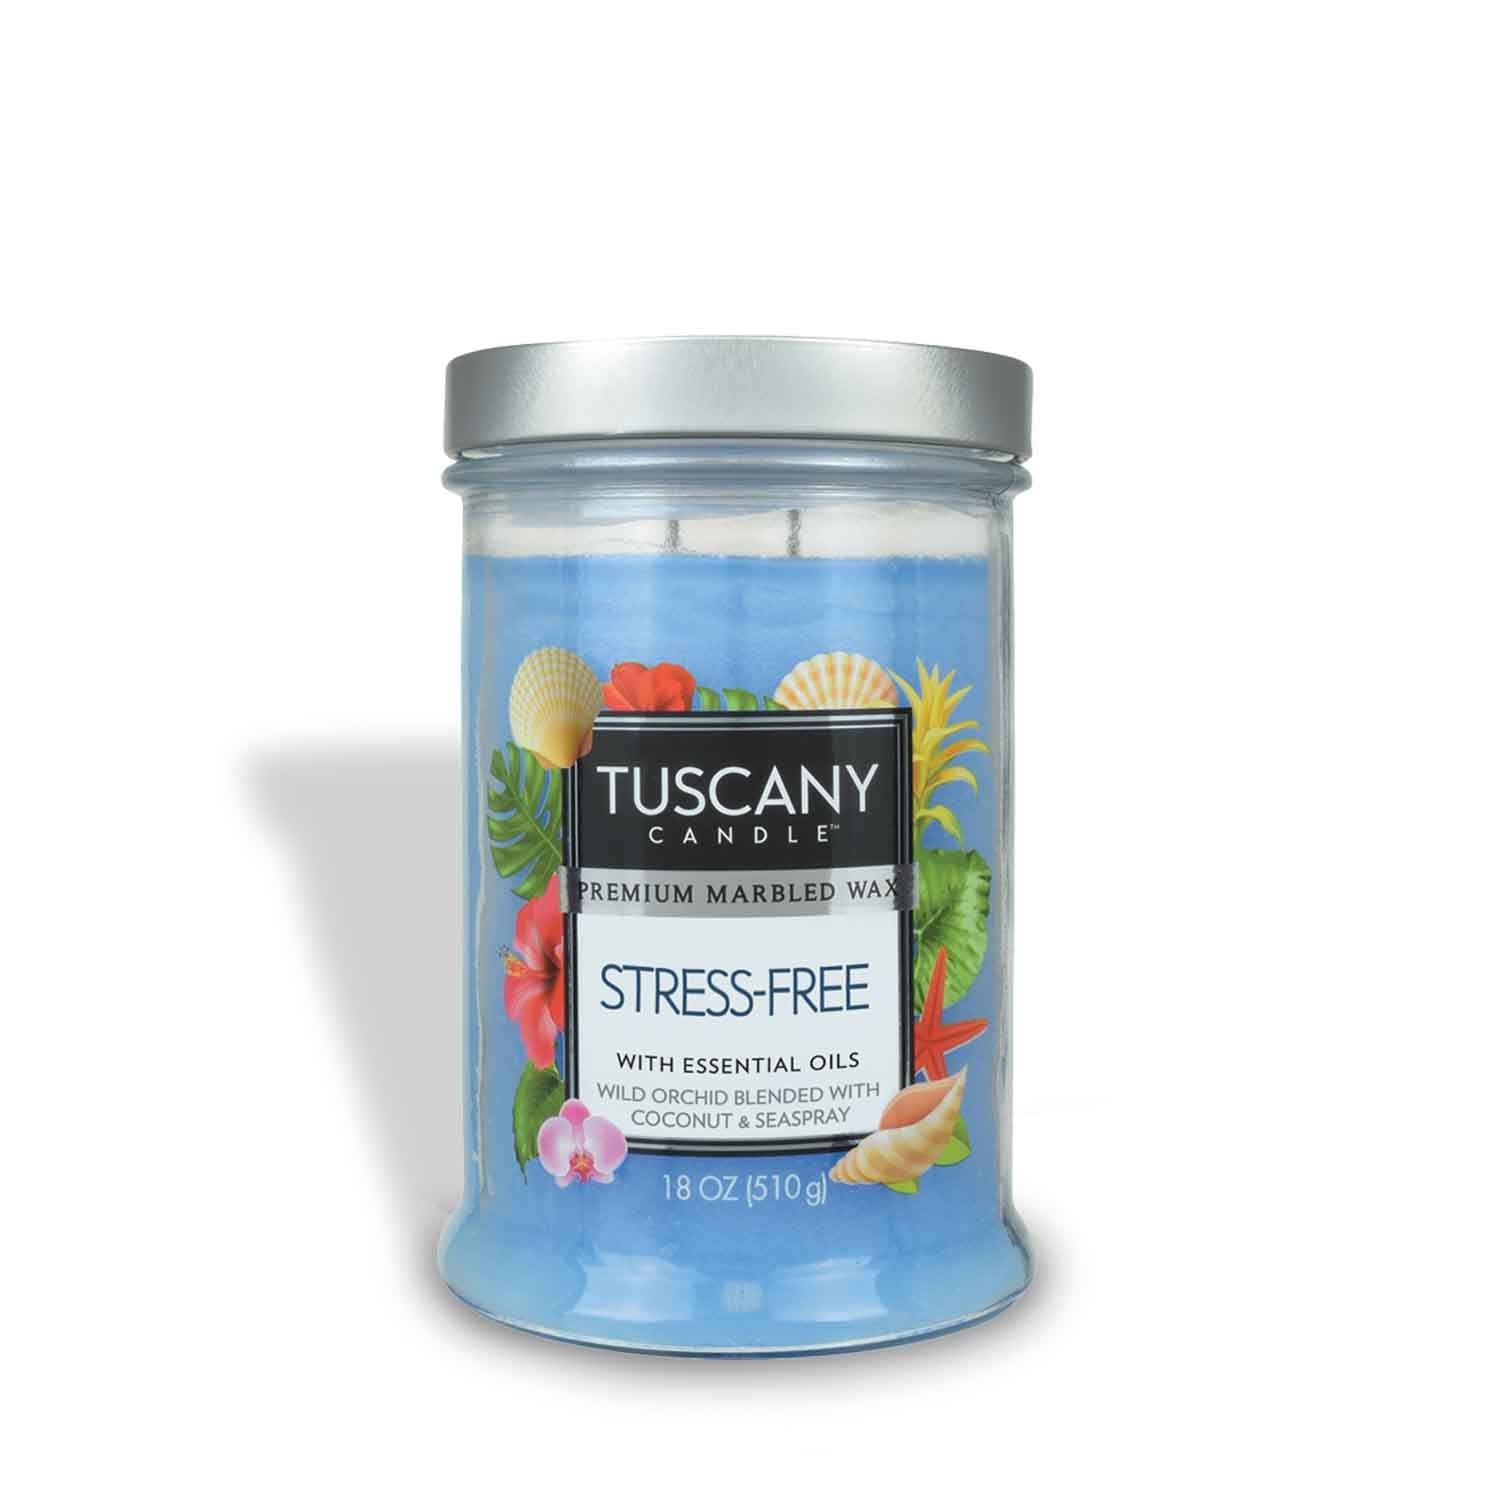 Stress Free - a fresh, relaxing candle